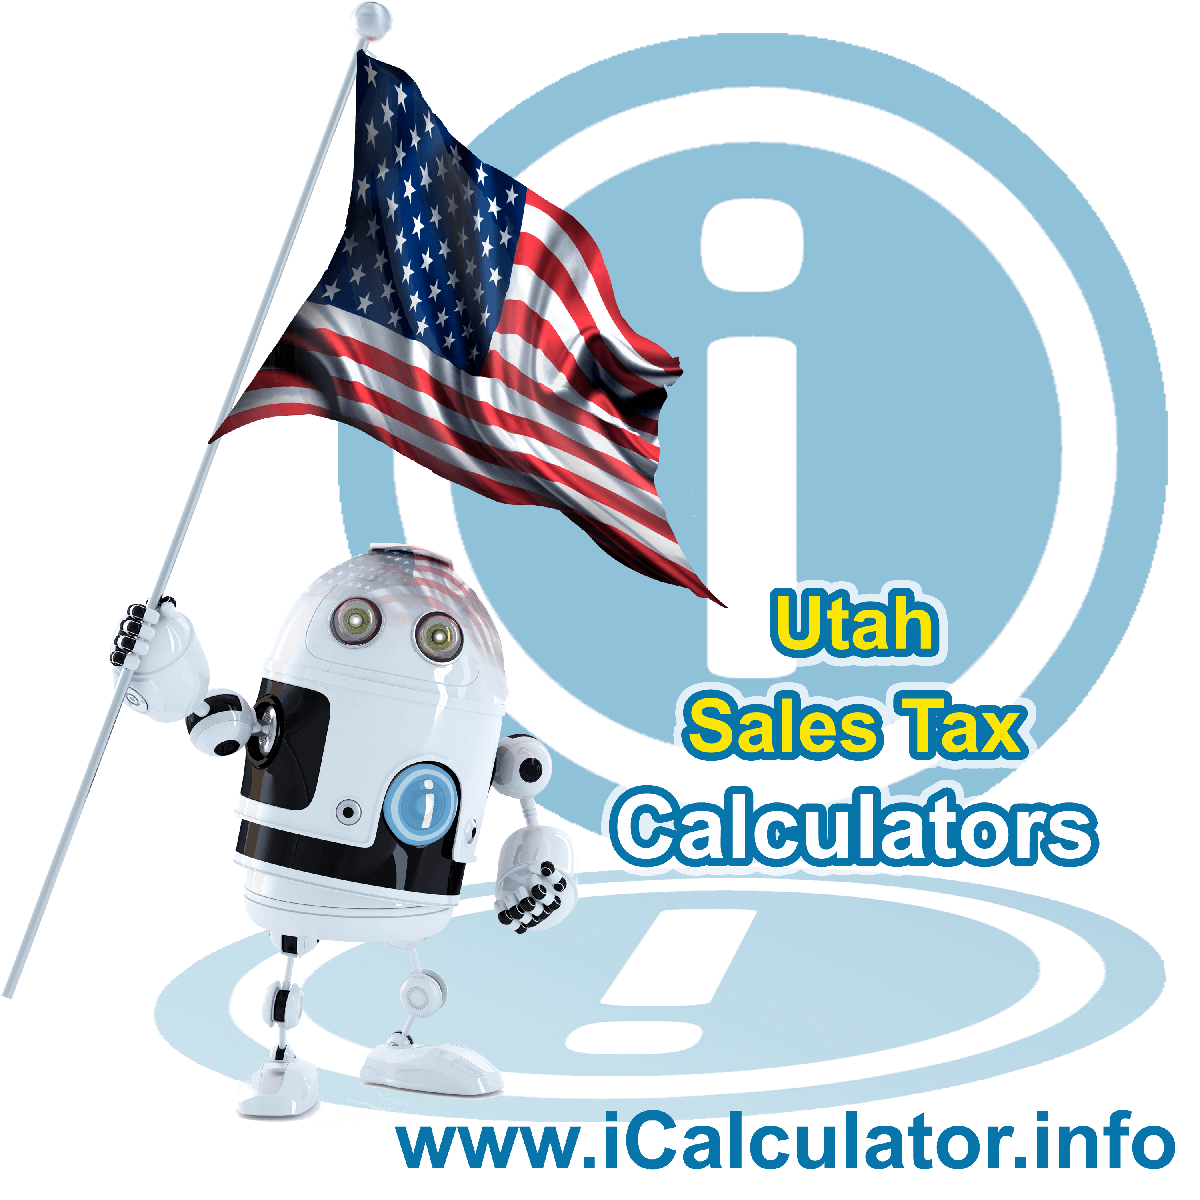 Lindon Sales Rates: This image illustrates a calculator robot calculating Lindon sales tax manually using the Lindon Sales Tax Formula. You can use this information to calculate Lindon Sales Tax manually or use the Lindon Sales Tax Calculator to calculate sales tax online.